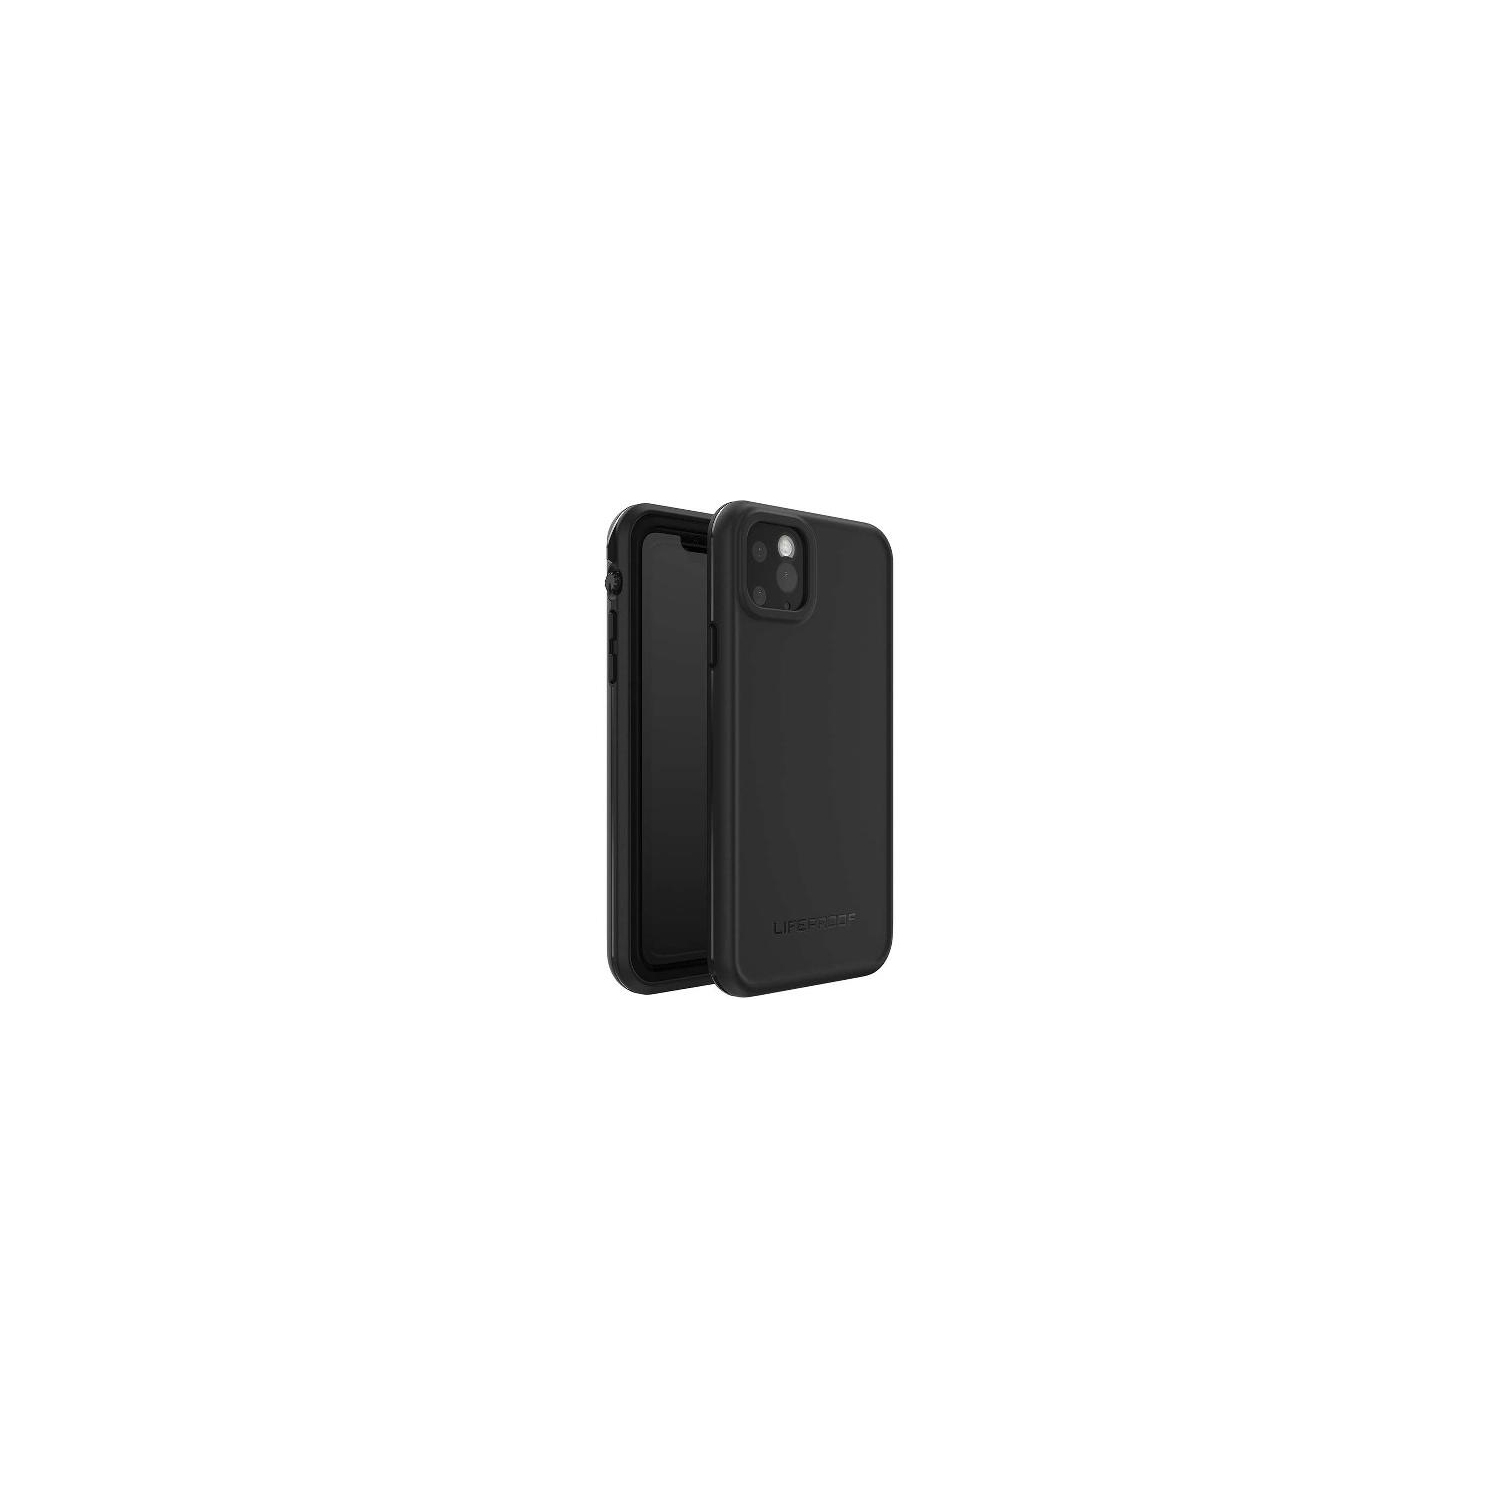 LifeProof FRE Series Waterproof Case for iPhone 11 Pro Max, Black